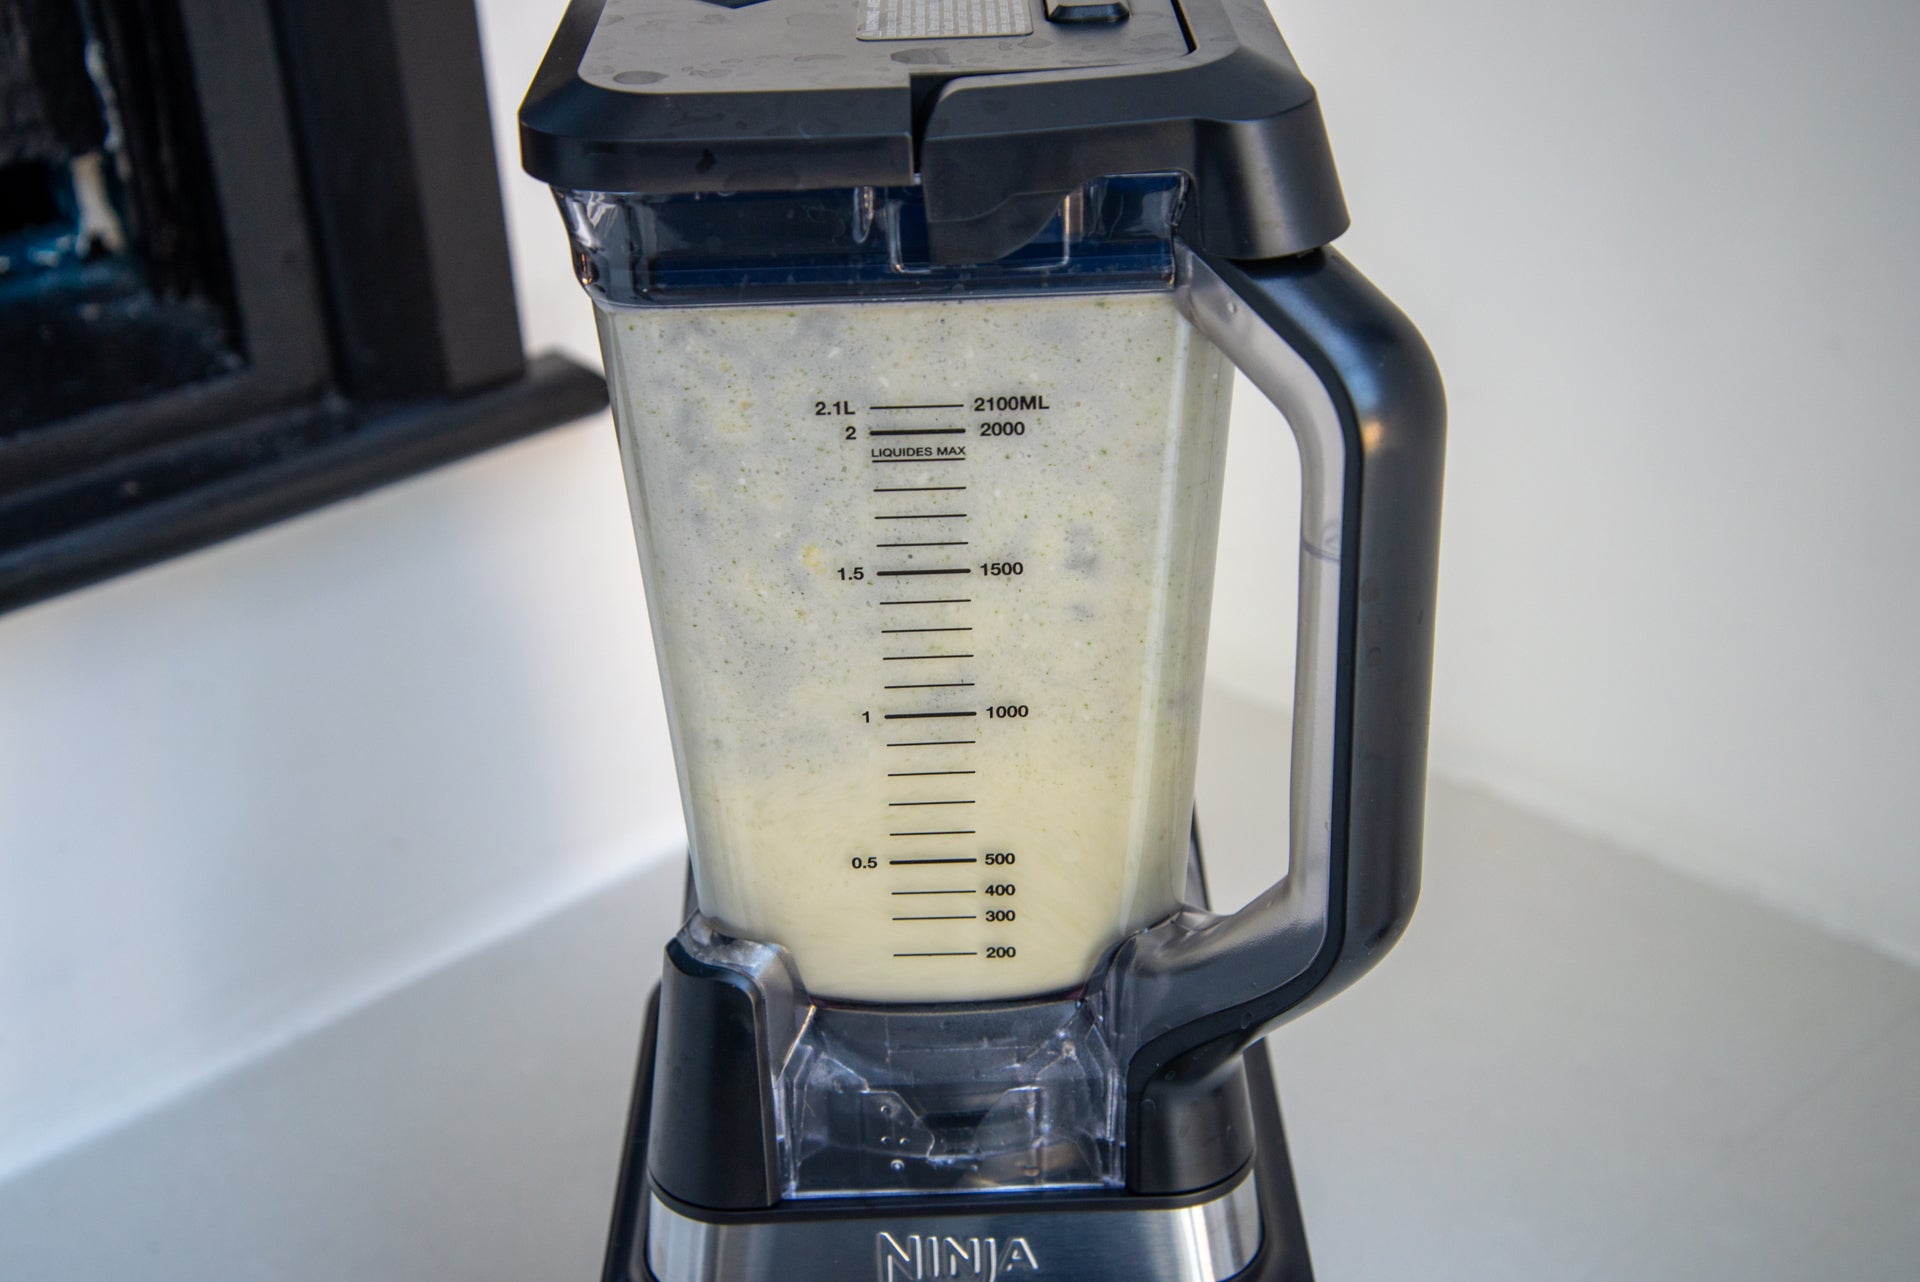 Best blender: Perfectly smooth drinks the easy way